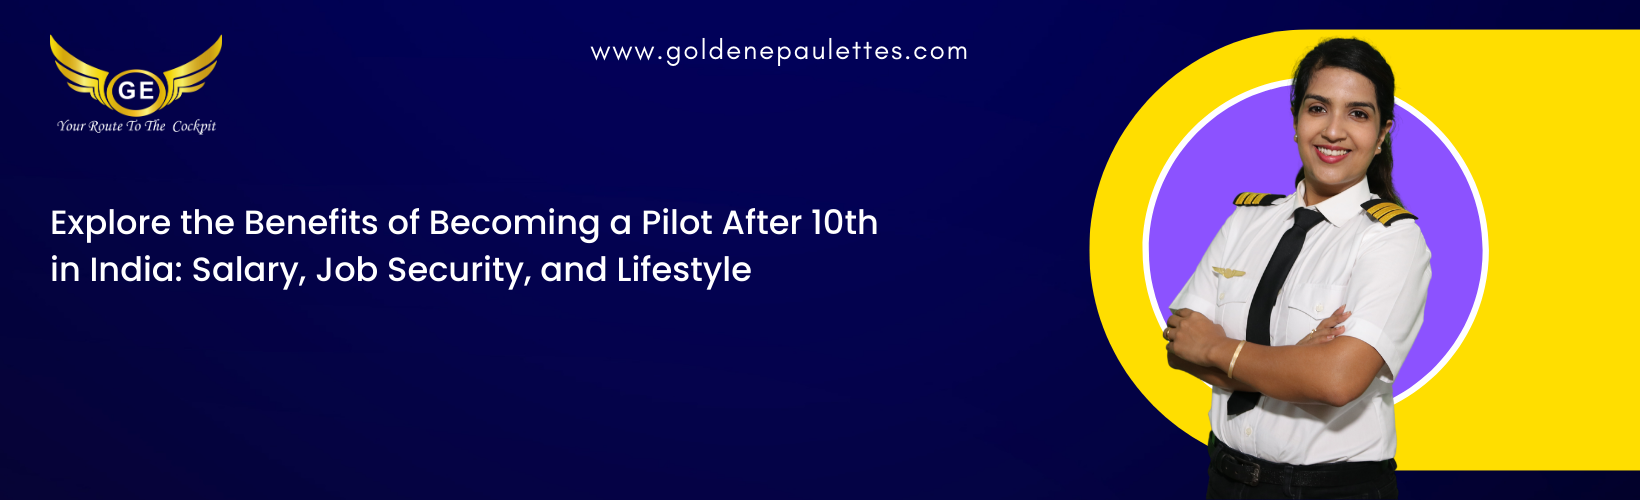 This article will provide an overview of the benefits of becoming a pilot after 10th in India, including the salary, job security, and lifestyle. Reference